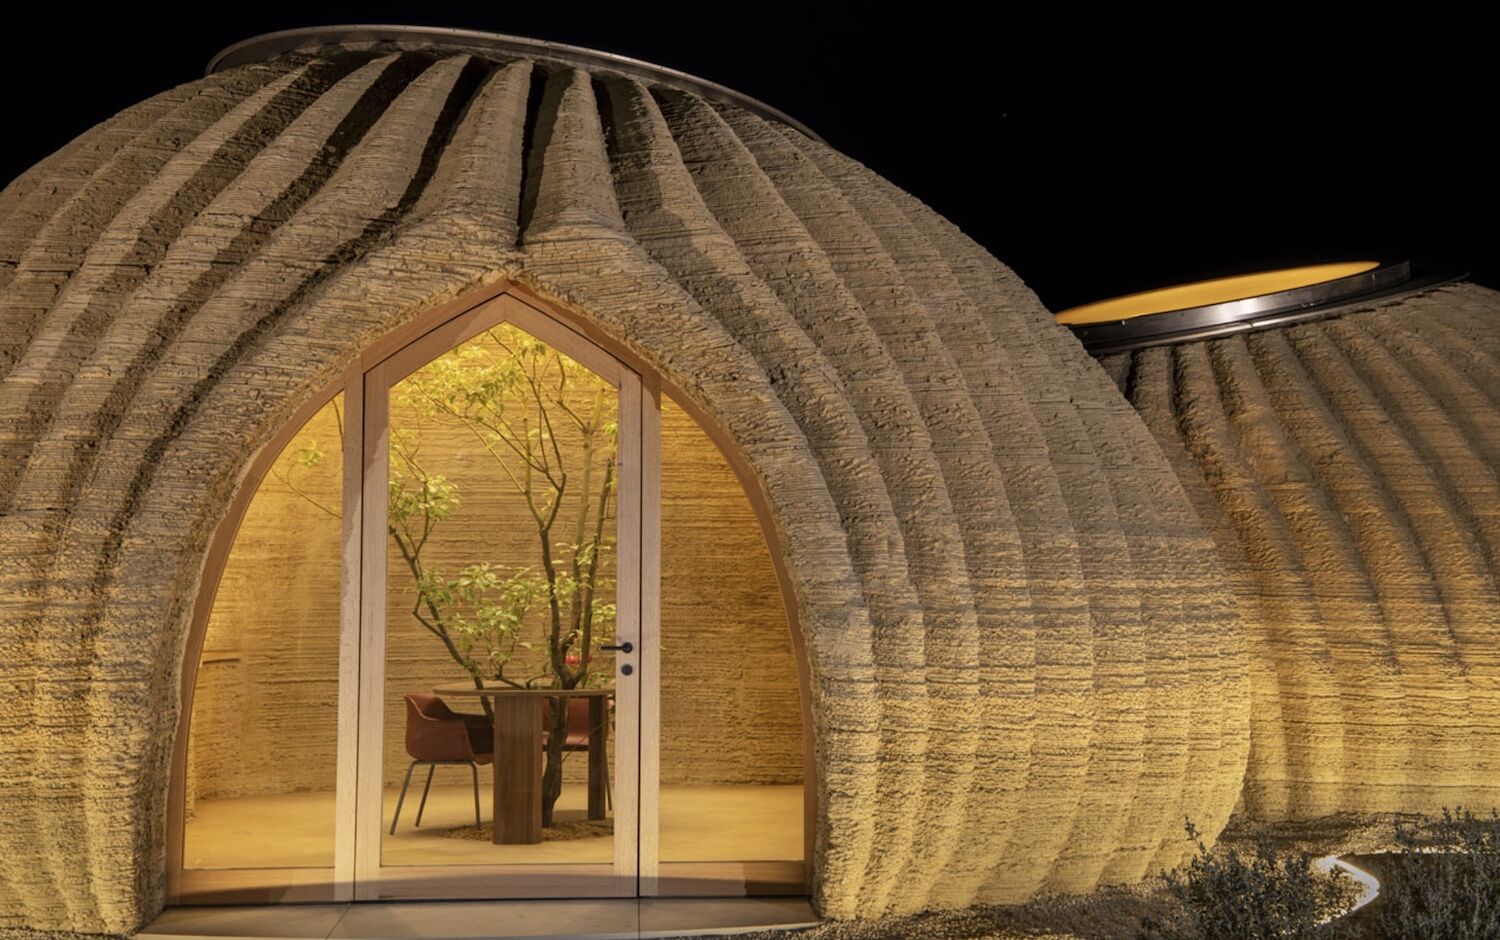 3D-printed houses in the shape of two domes